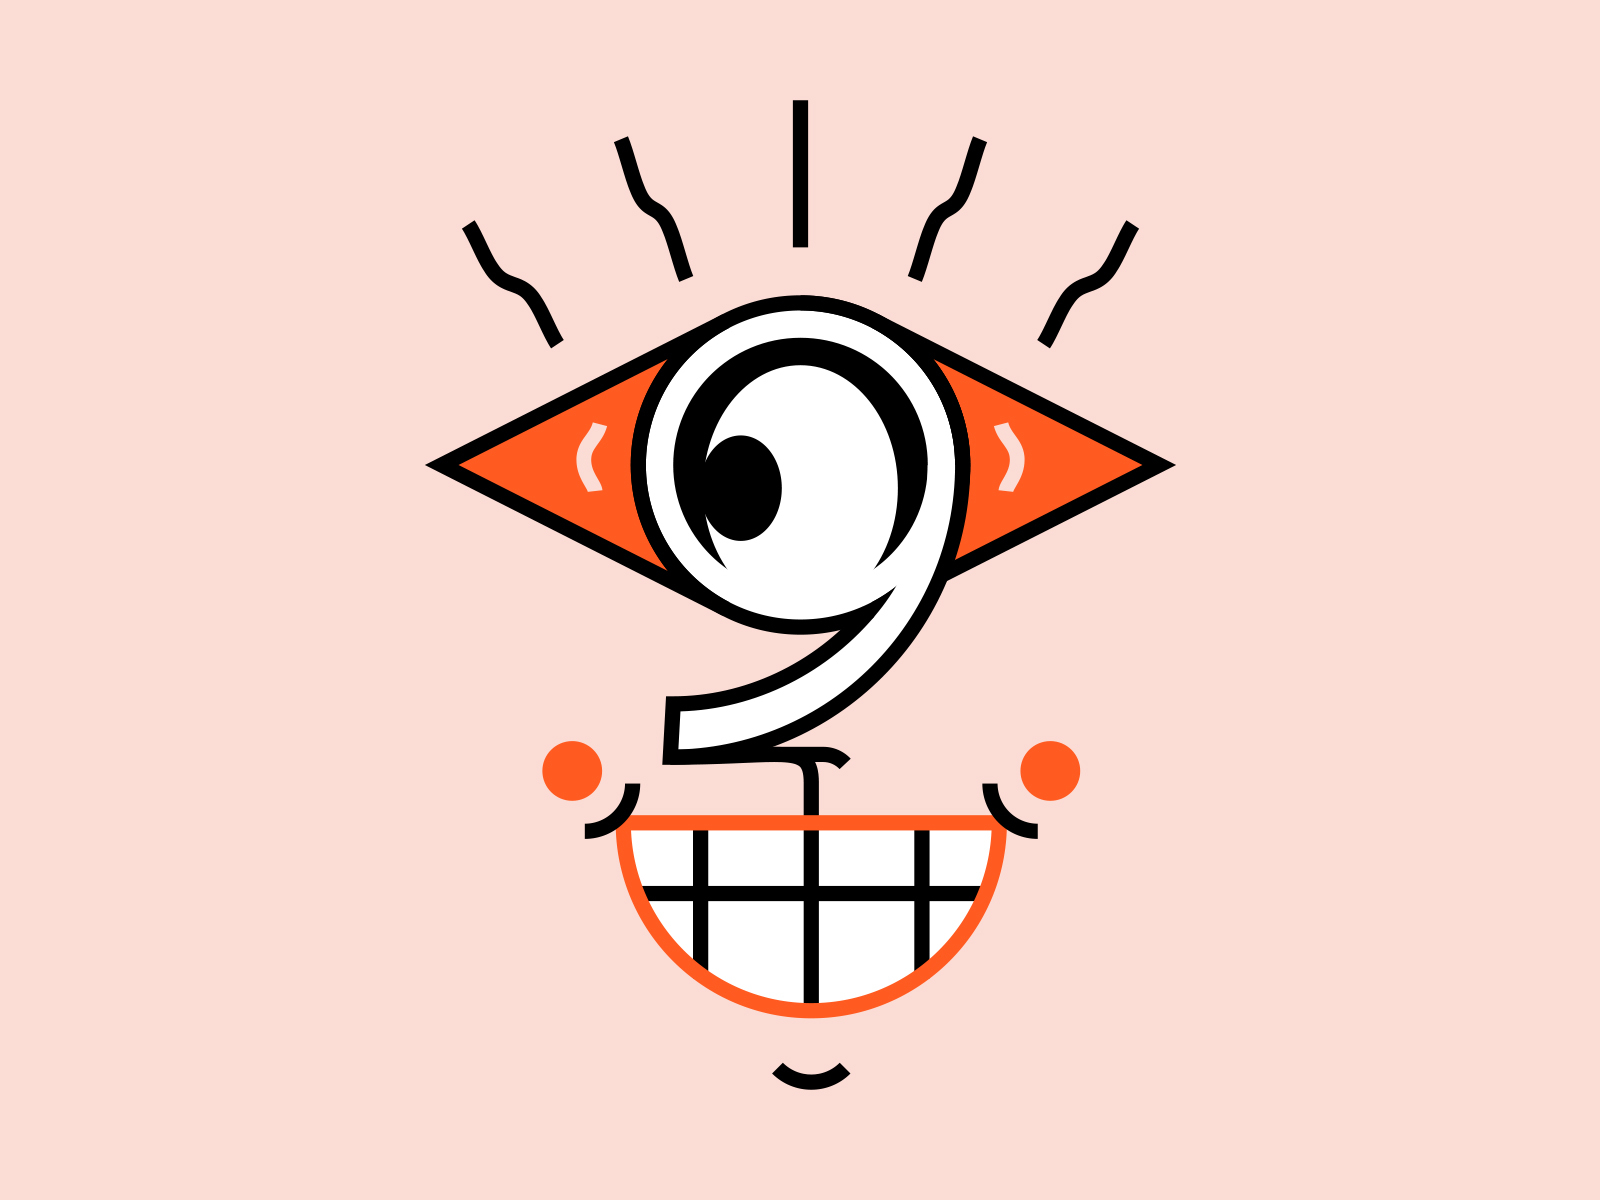 Meet the 9s 9 design eye face illustration nine number silly type vector